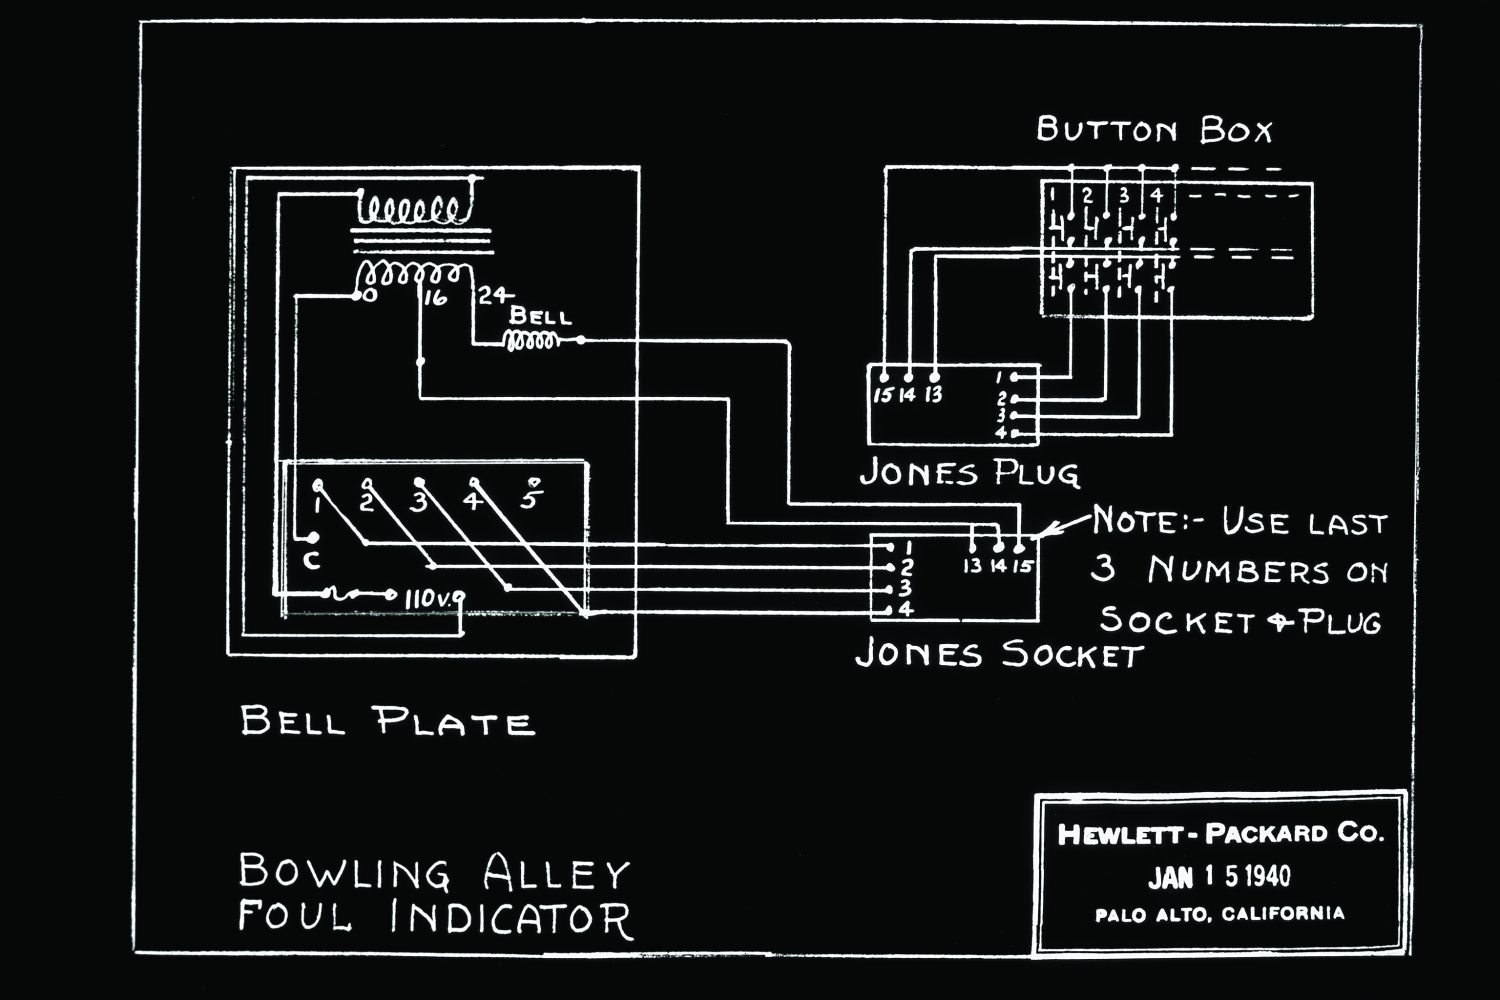 Schematic for a bowling alley foul indicator from 1940.